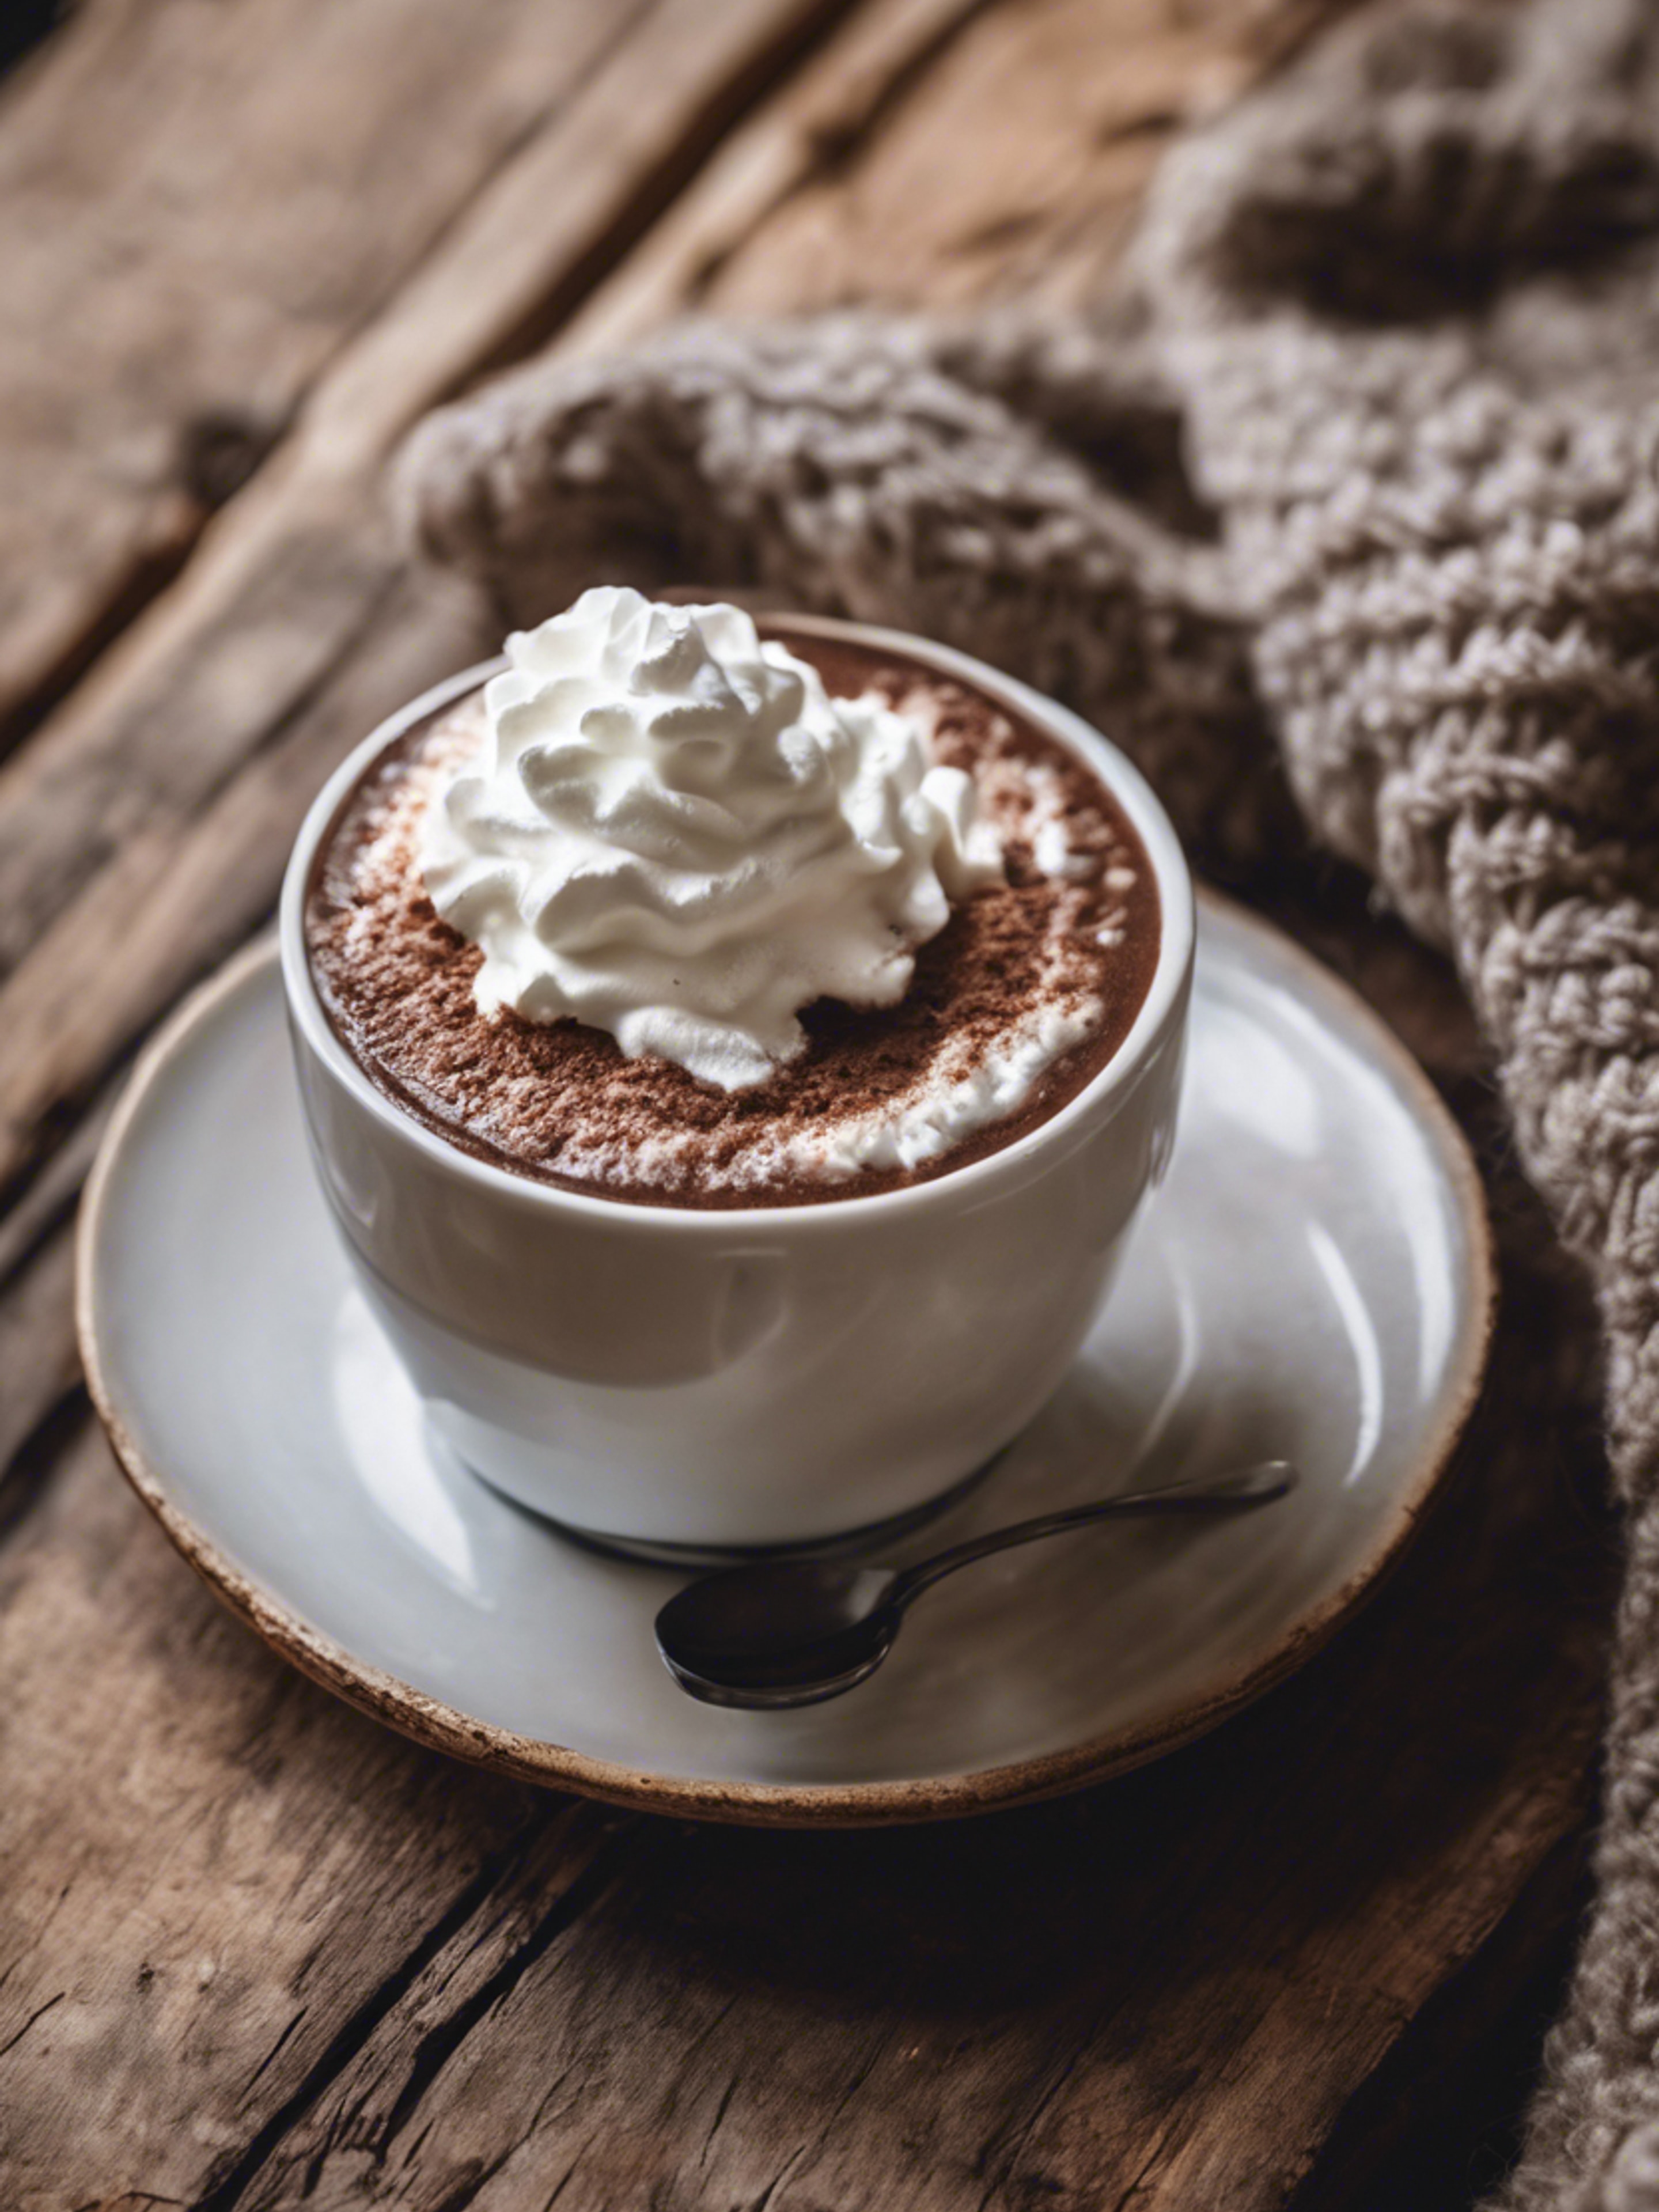 A porcelain cup of steaming hot chocolate topped with whipped cream, next to a crochet coaster on a rough wooden table. Wallpaper[f8ececc79cde48c88690]